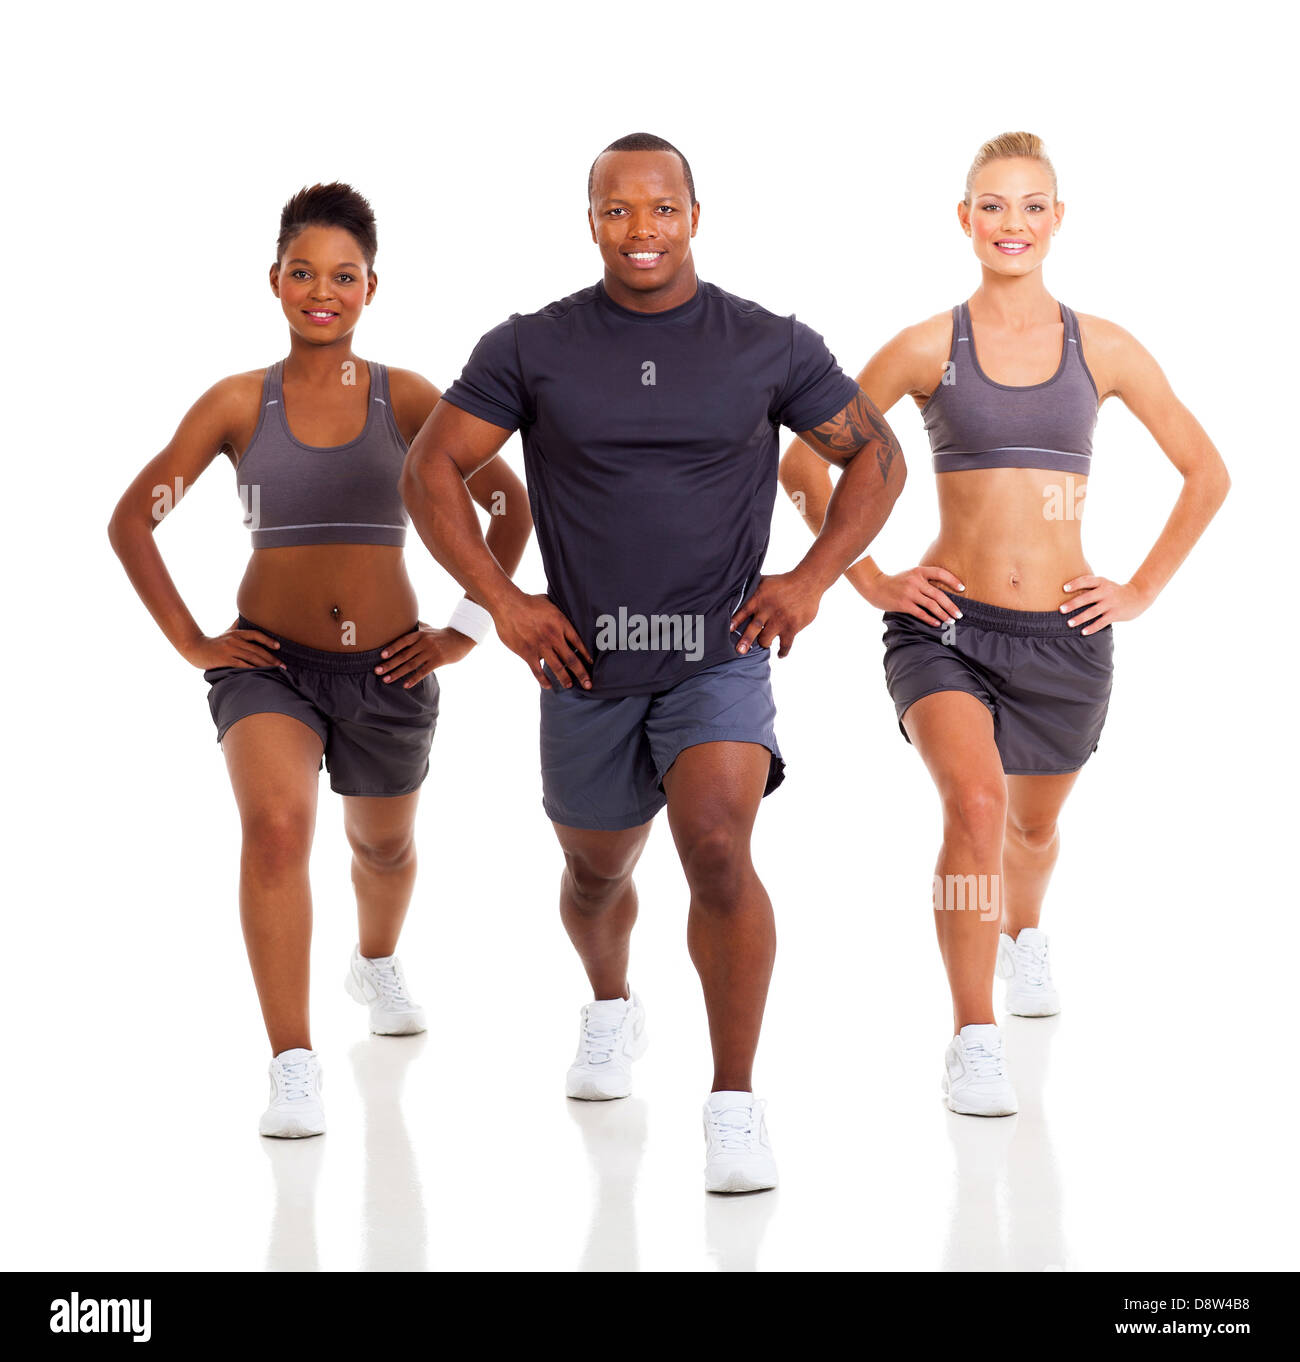 three healthy people exercising on white background Stock Photo